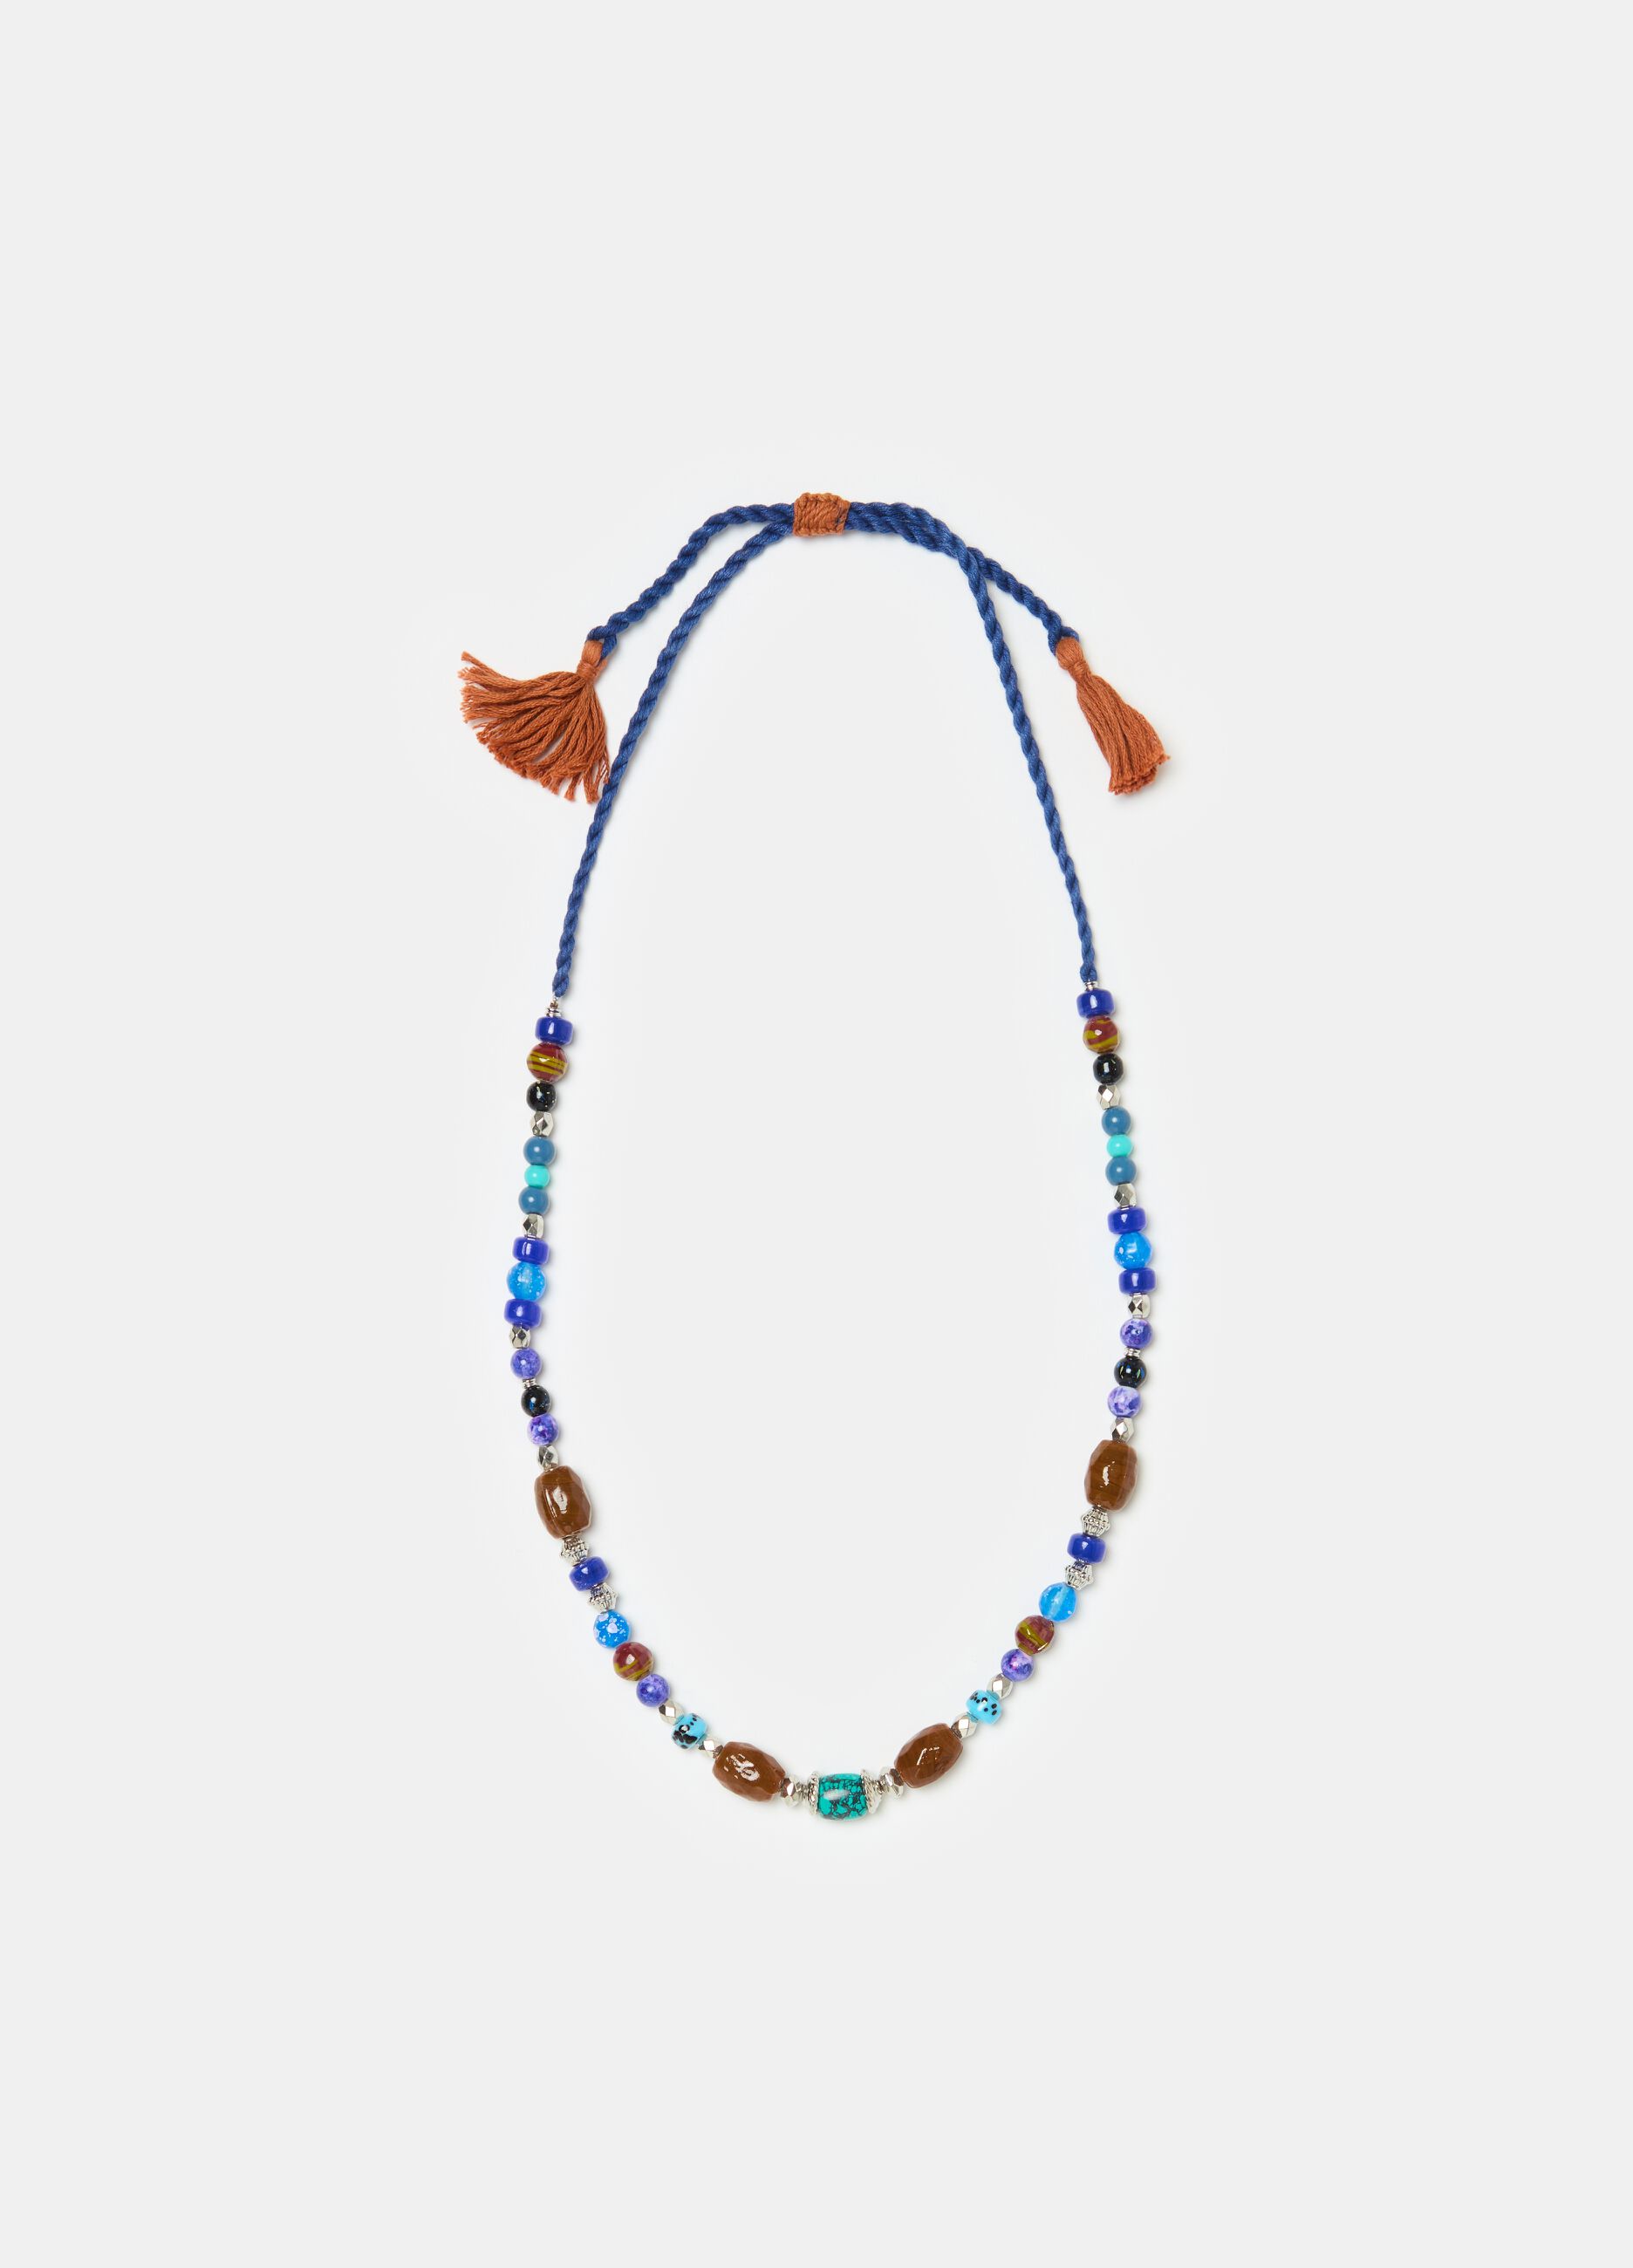 Adjustable necklace with gems and beads